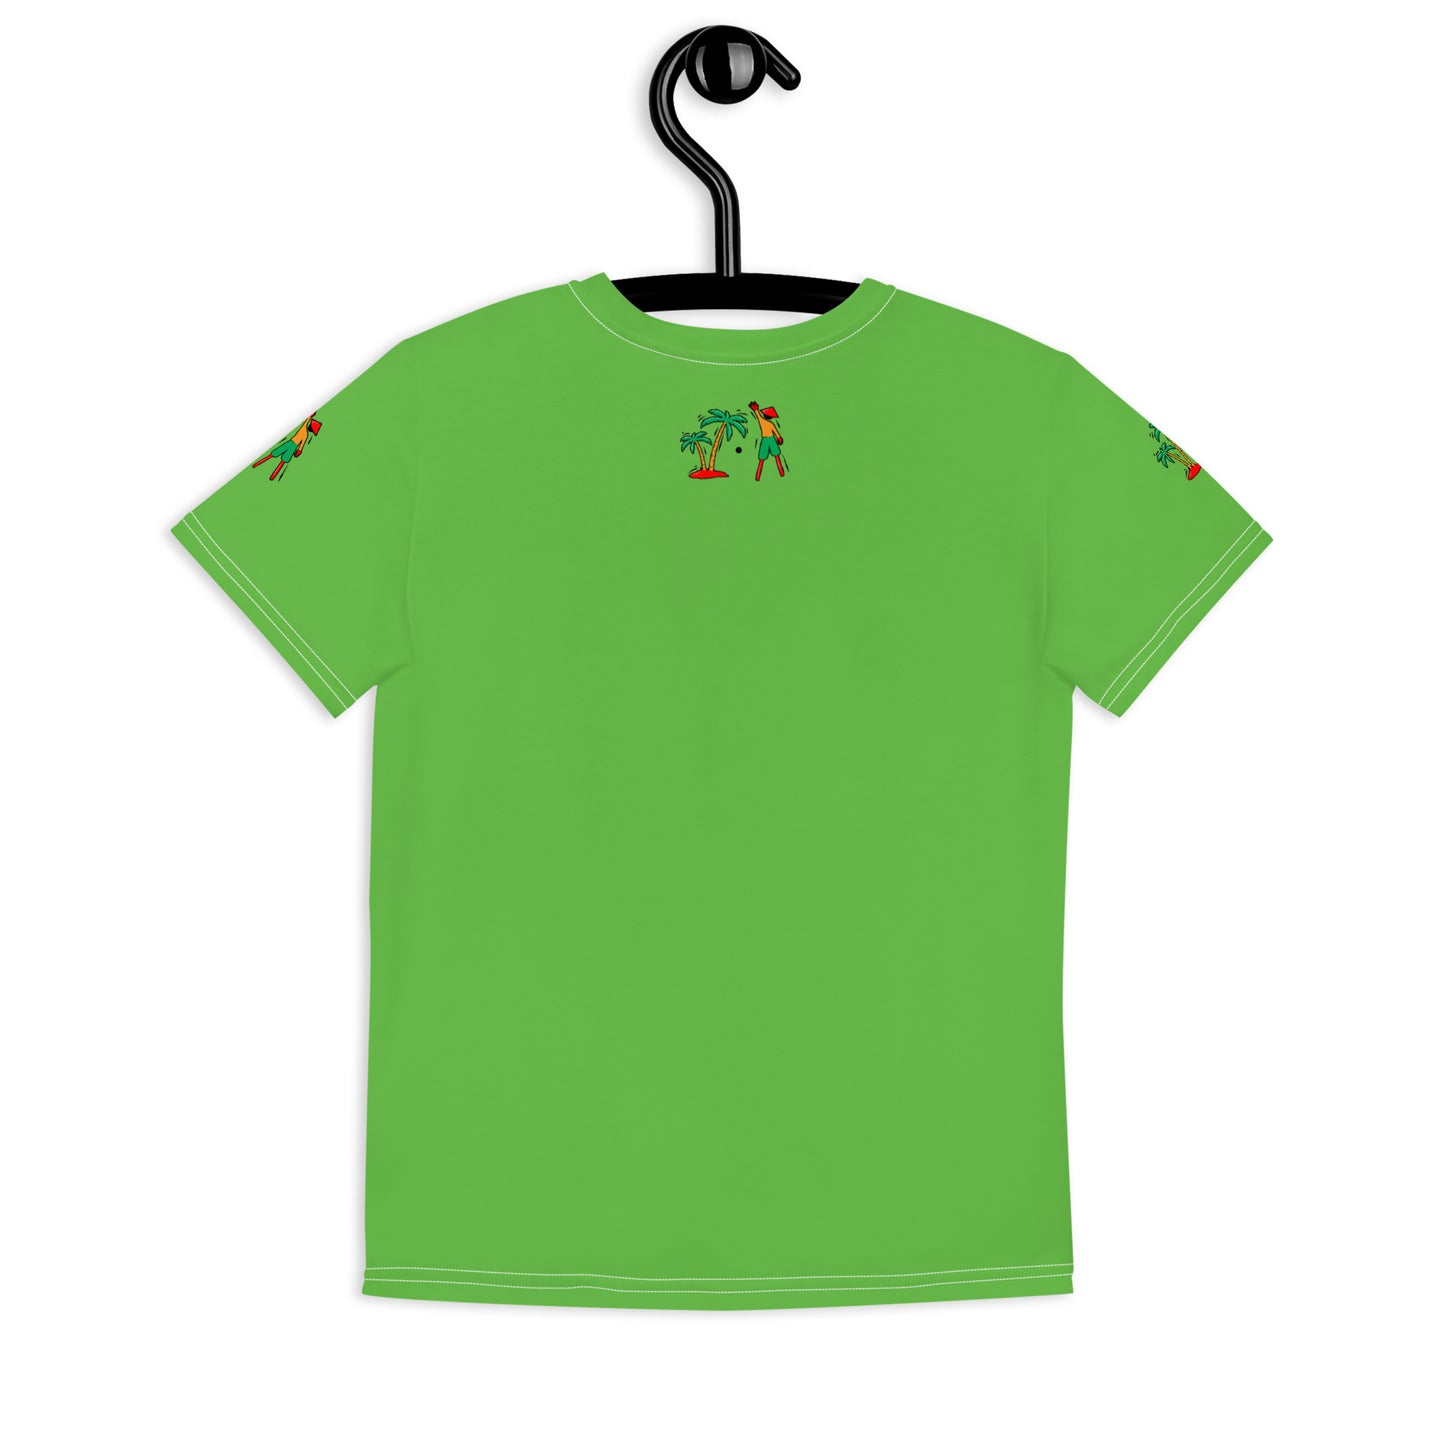 Green V.Localized (Ice/Gold/Green) Youth Dry-Fit T-Shirt